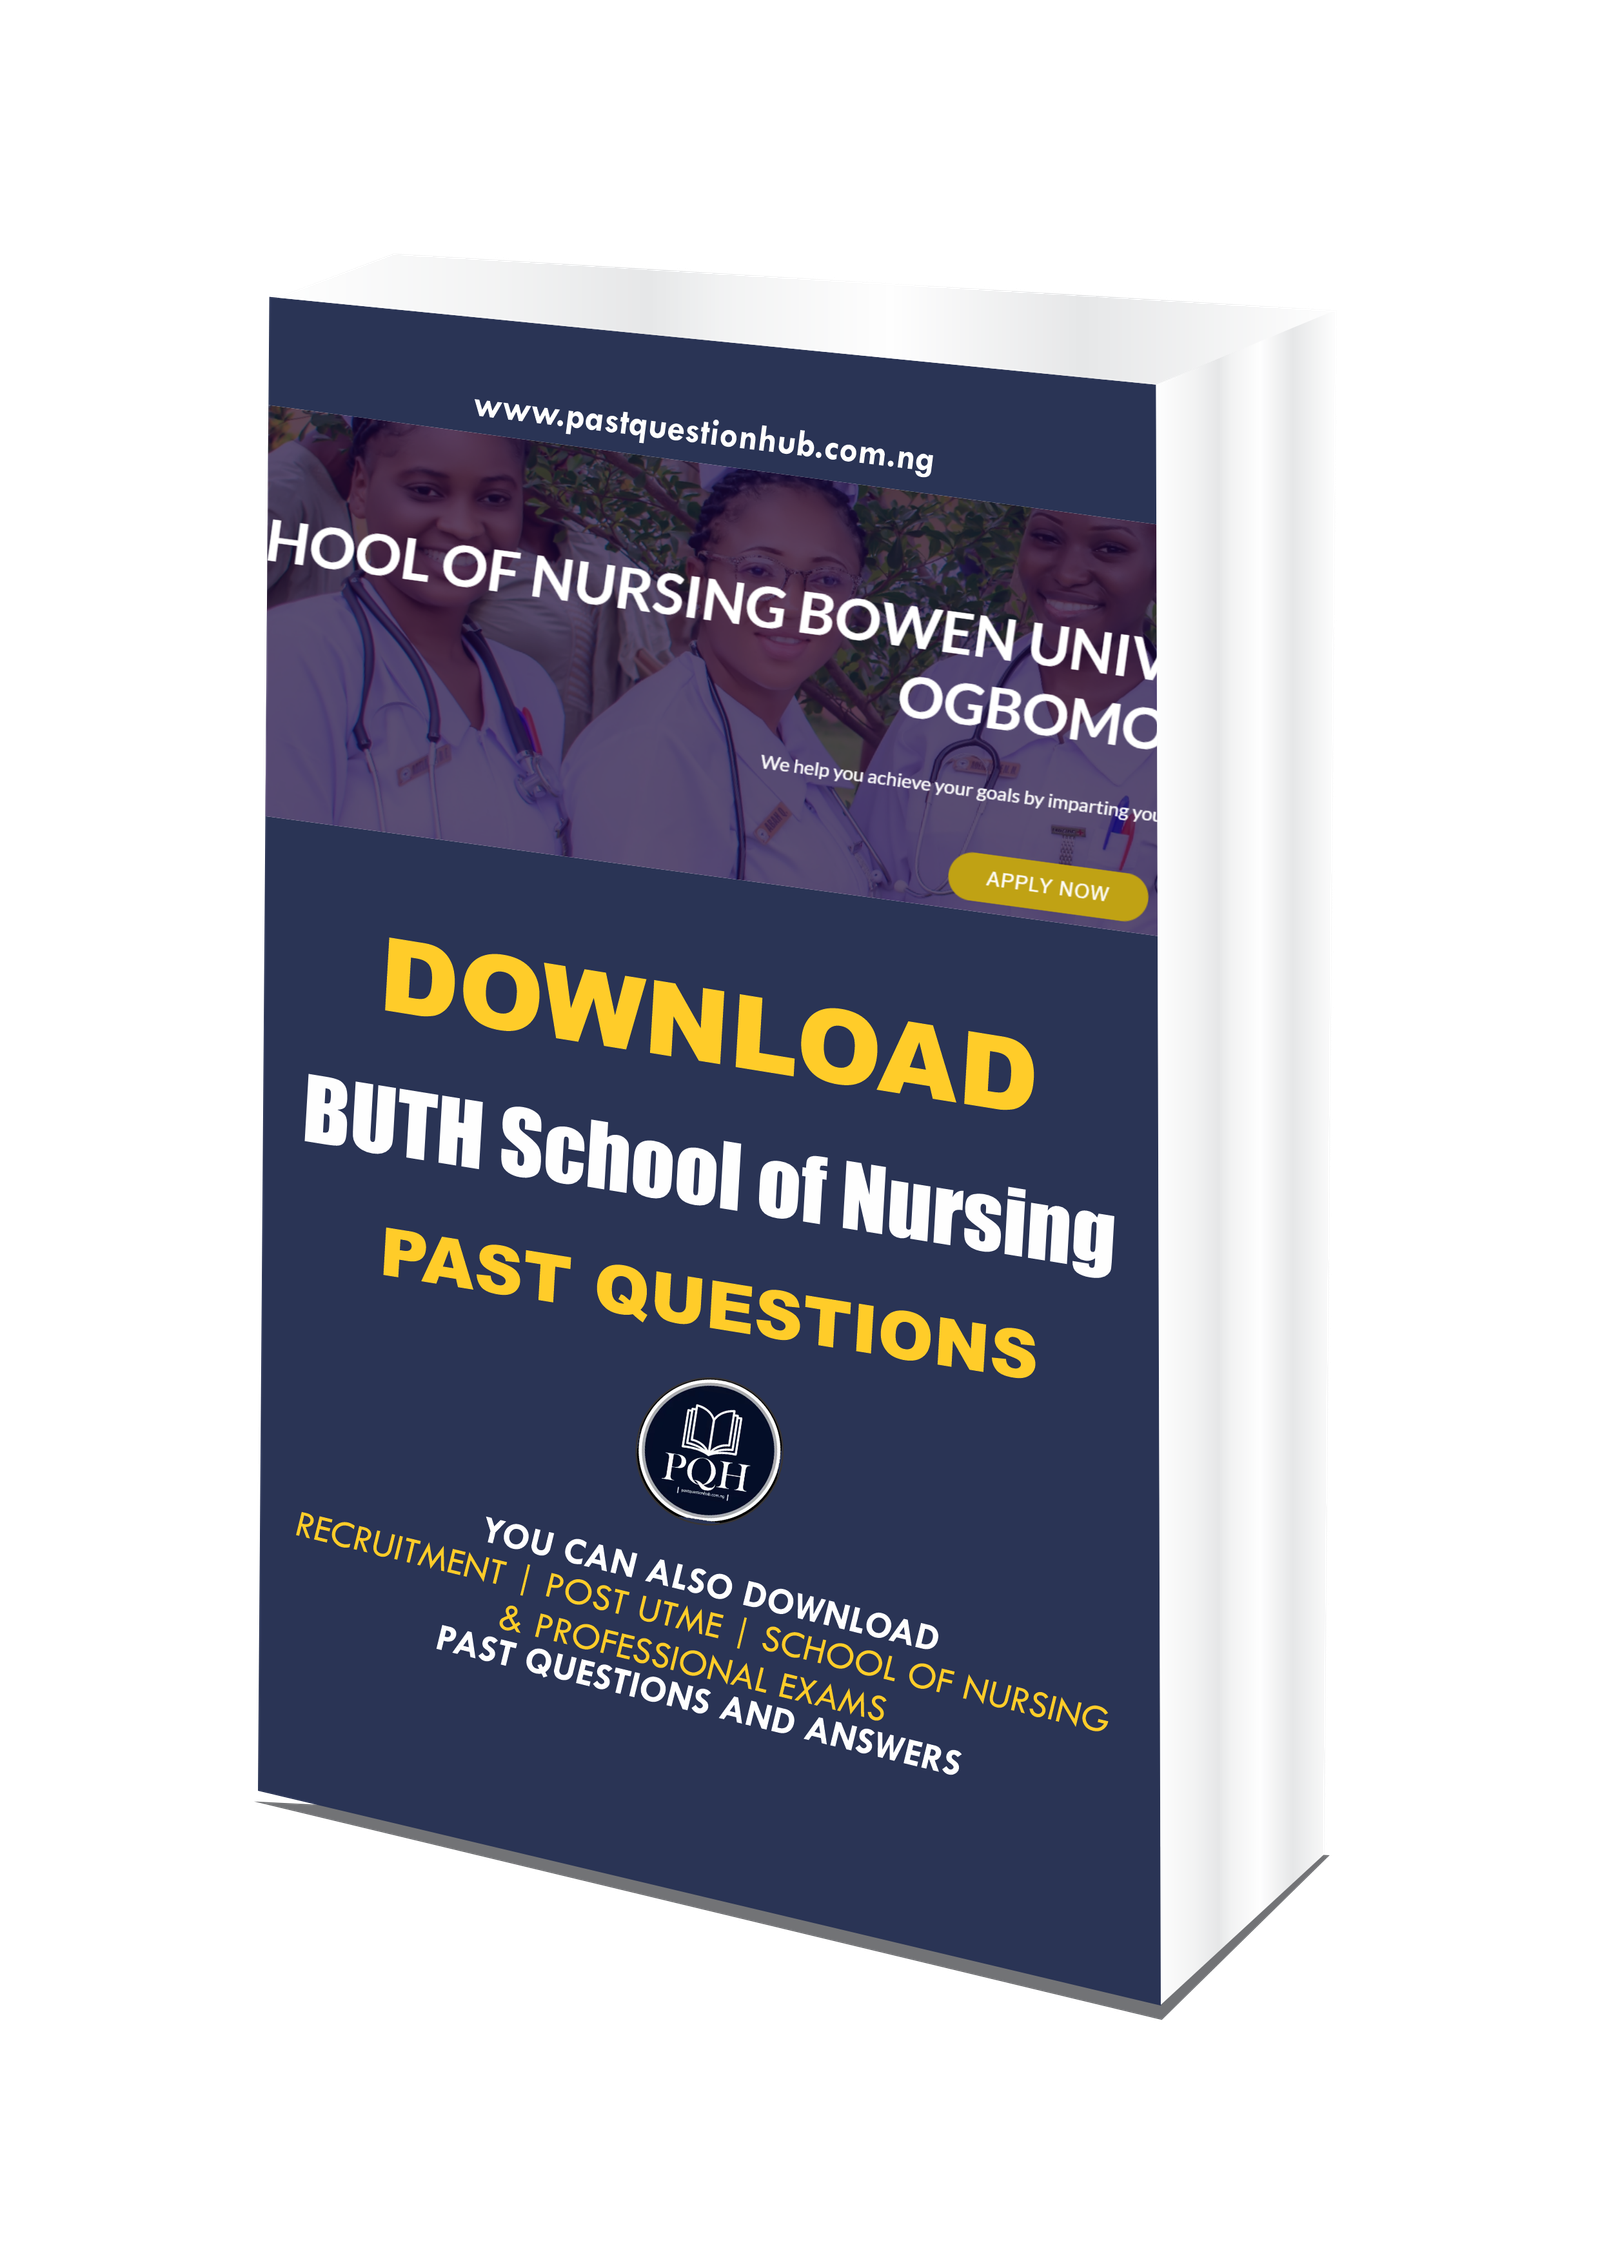 BUTH School of Nursing Past Questions and Answers PDF Download